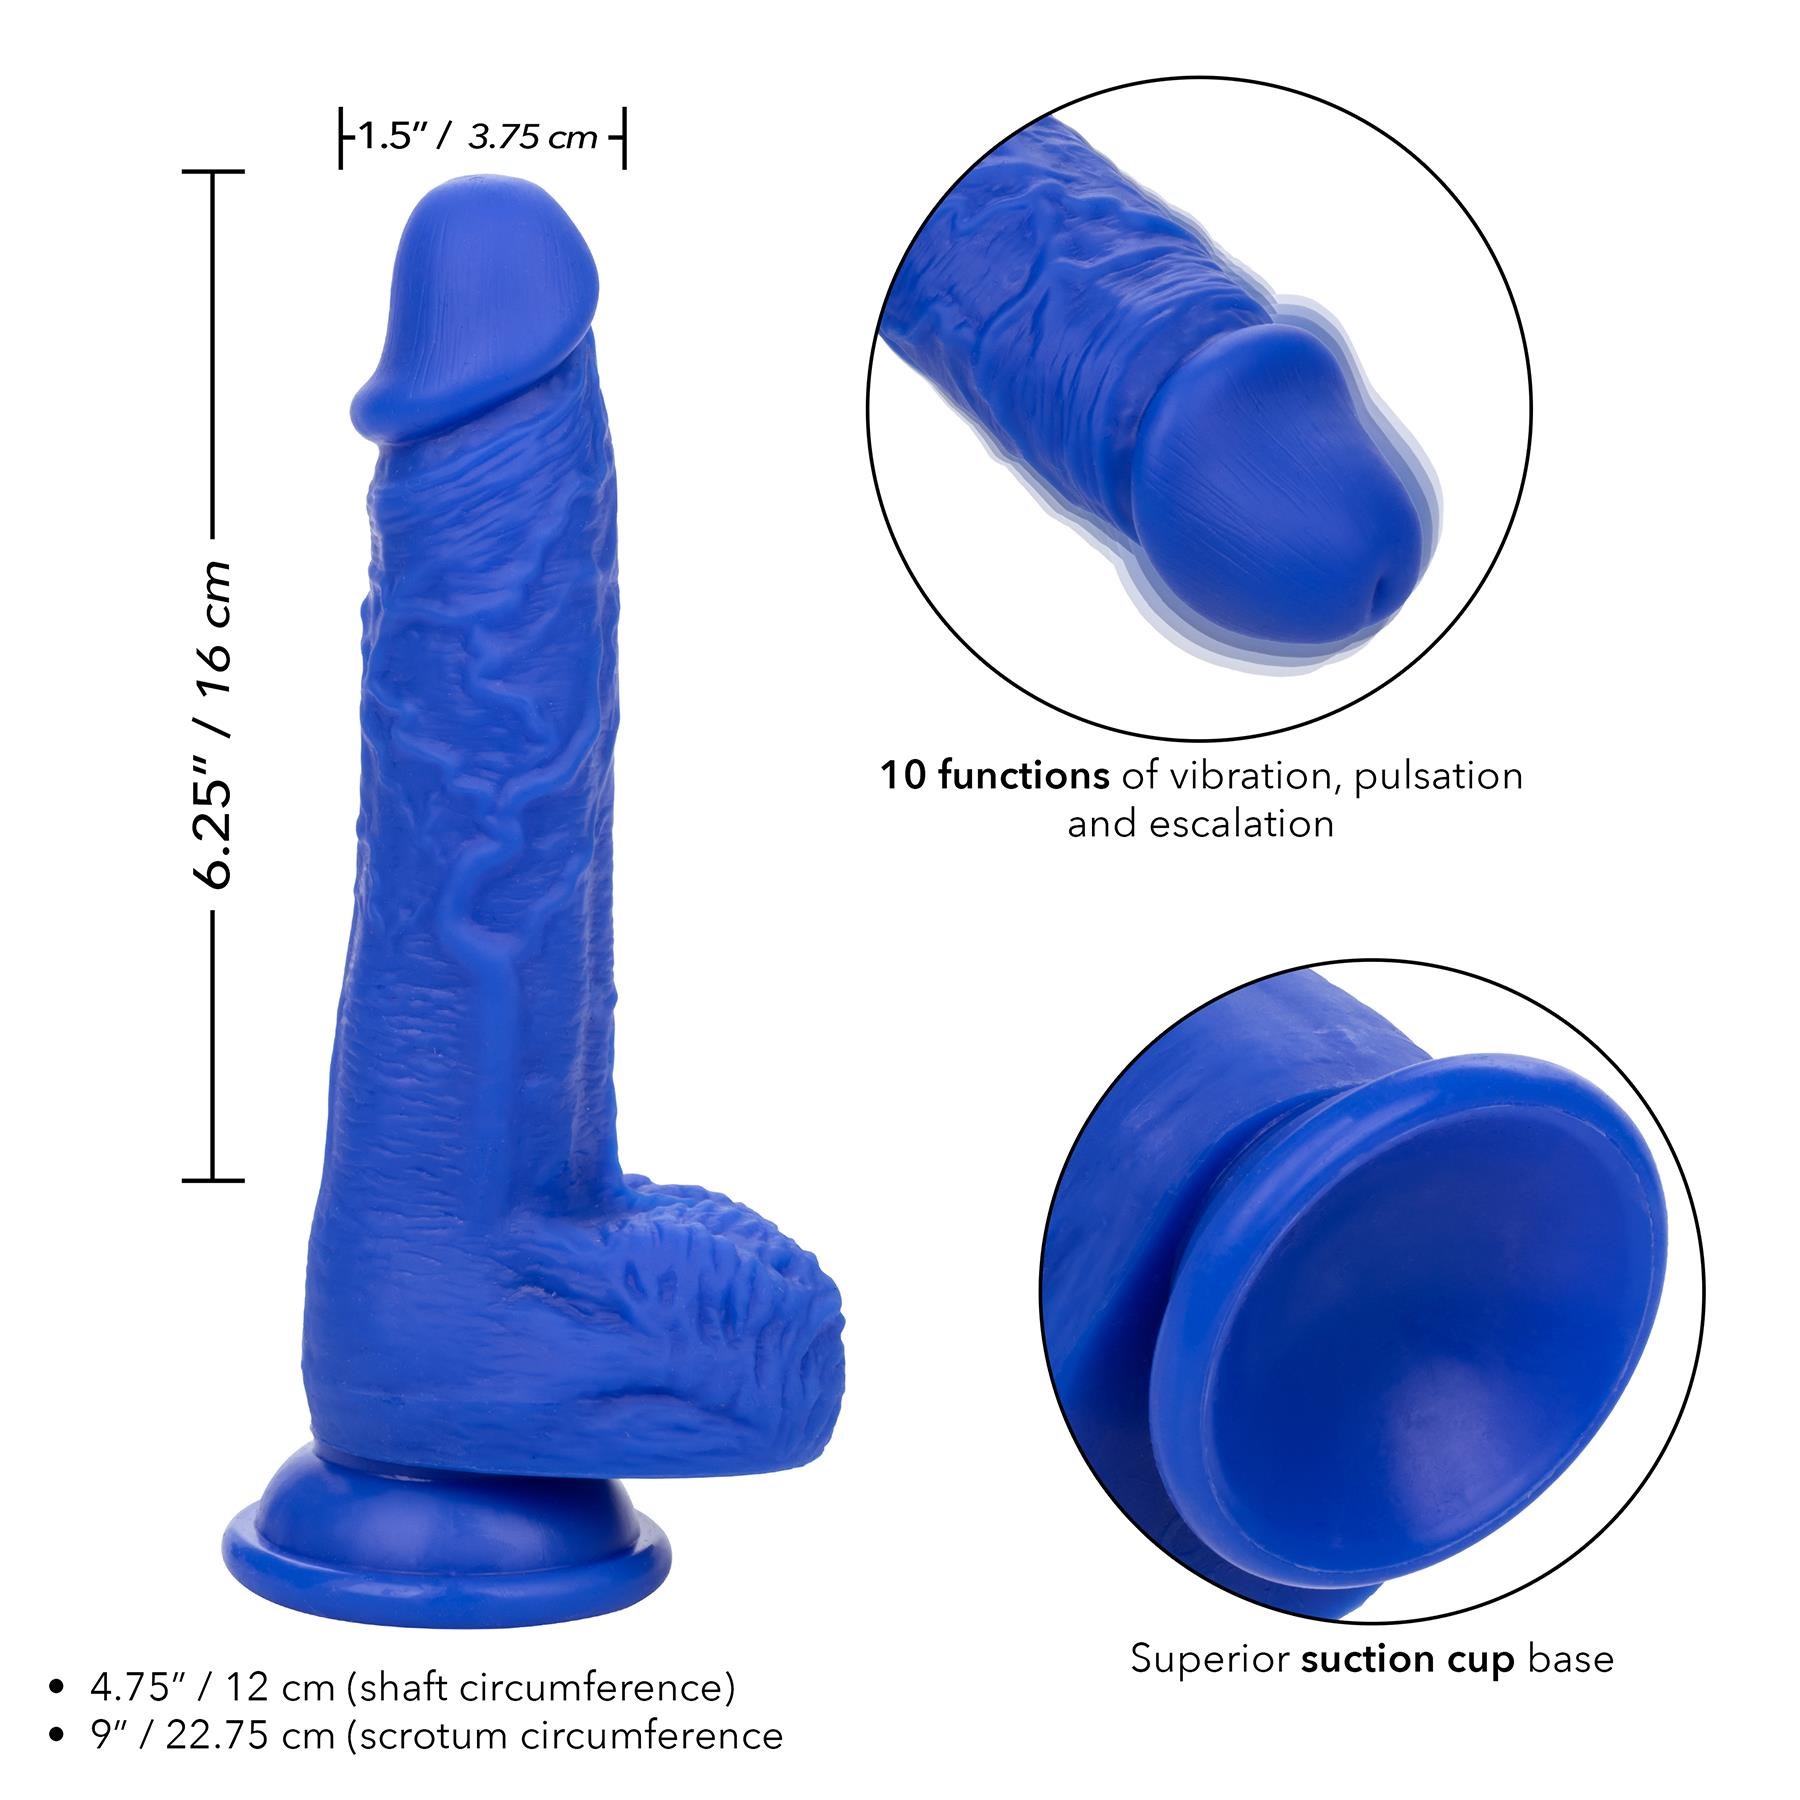 Admiral 7 Inch Vibrating Sailor Dildo - Instructions and Dimensions